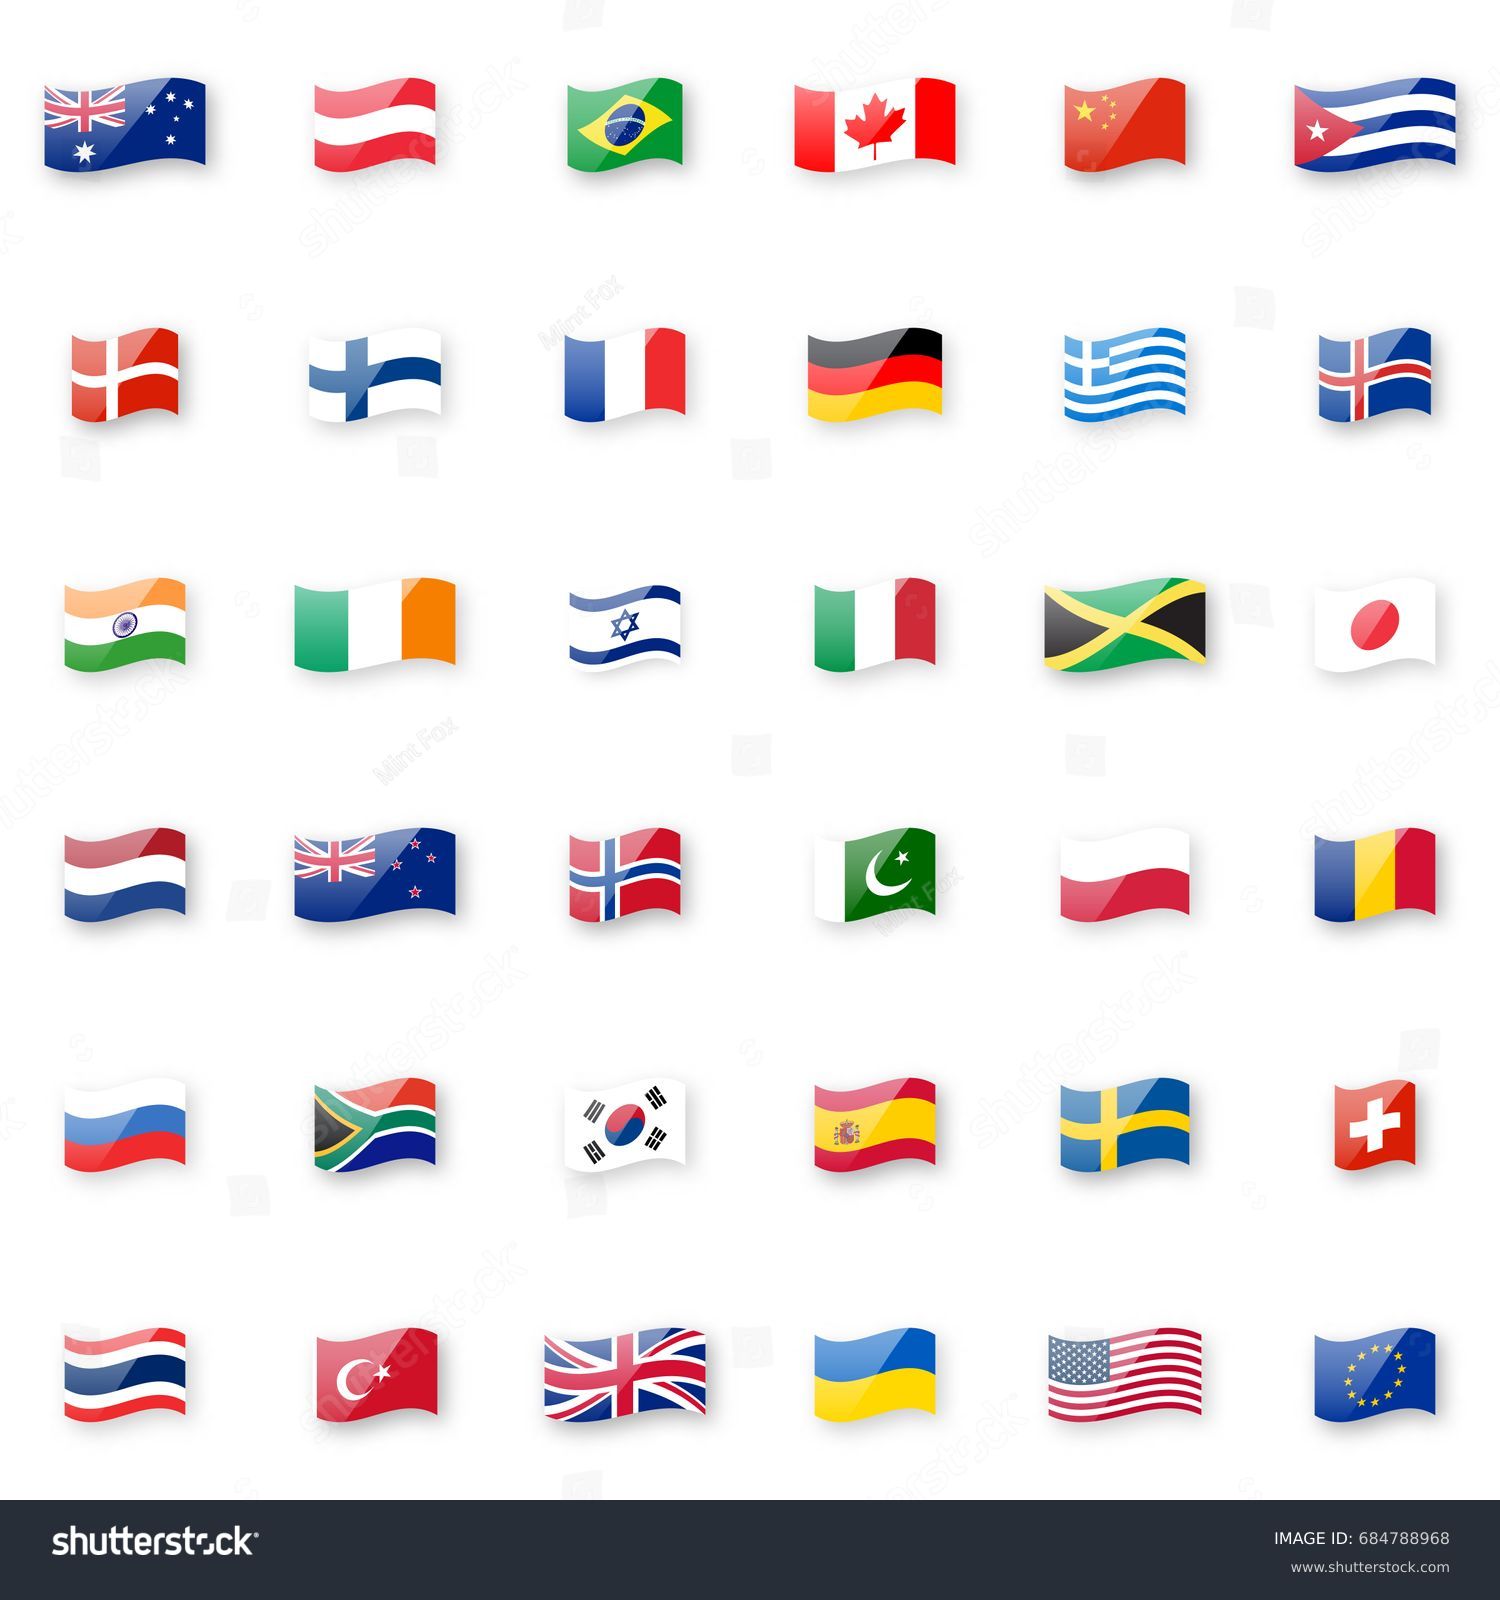 SVG of World flags vector icon set. Shiny glossy small waving flag icons for your design. svg